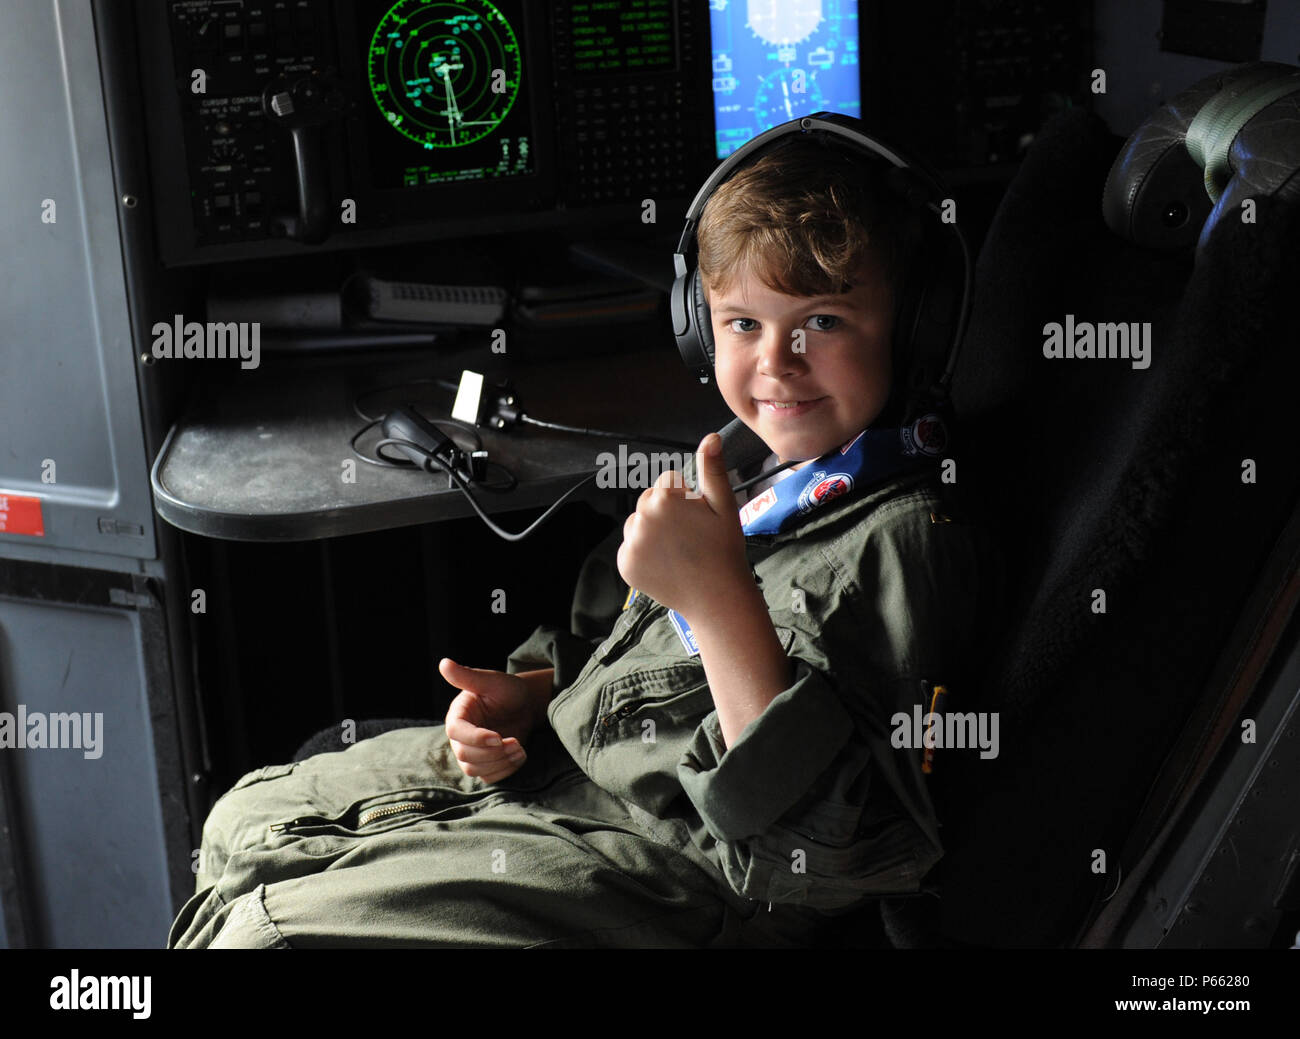 Jon Bryant “JB” Orso sits aboard a WC-130J Super Hercules during the 403rd Wing’s first Pilot for a Day event April 26, 2016, Keesler Air Force Base, Miss. Orso, who served as an honorary Air Force Reserve second lieutenant, is in remission after receiving treatment for Acute Lymphoblastic Leukemia. Pilot for a Day is a community outreach program for children who live with a chronic or life-threatening disease or illness. (U.S. Air Force photo by Kemberly Groue) Stock Photo